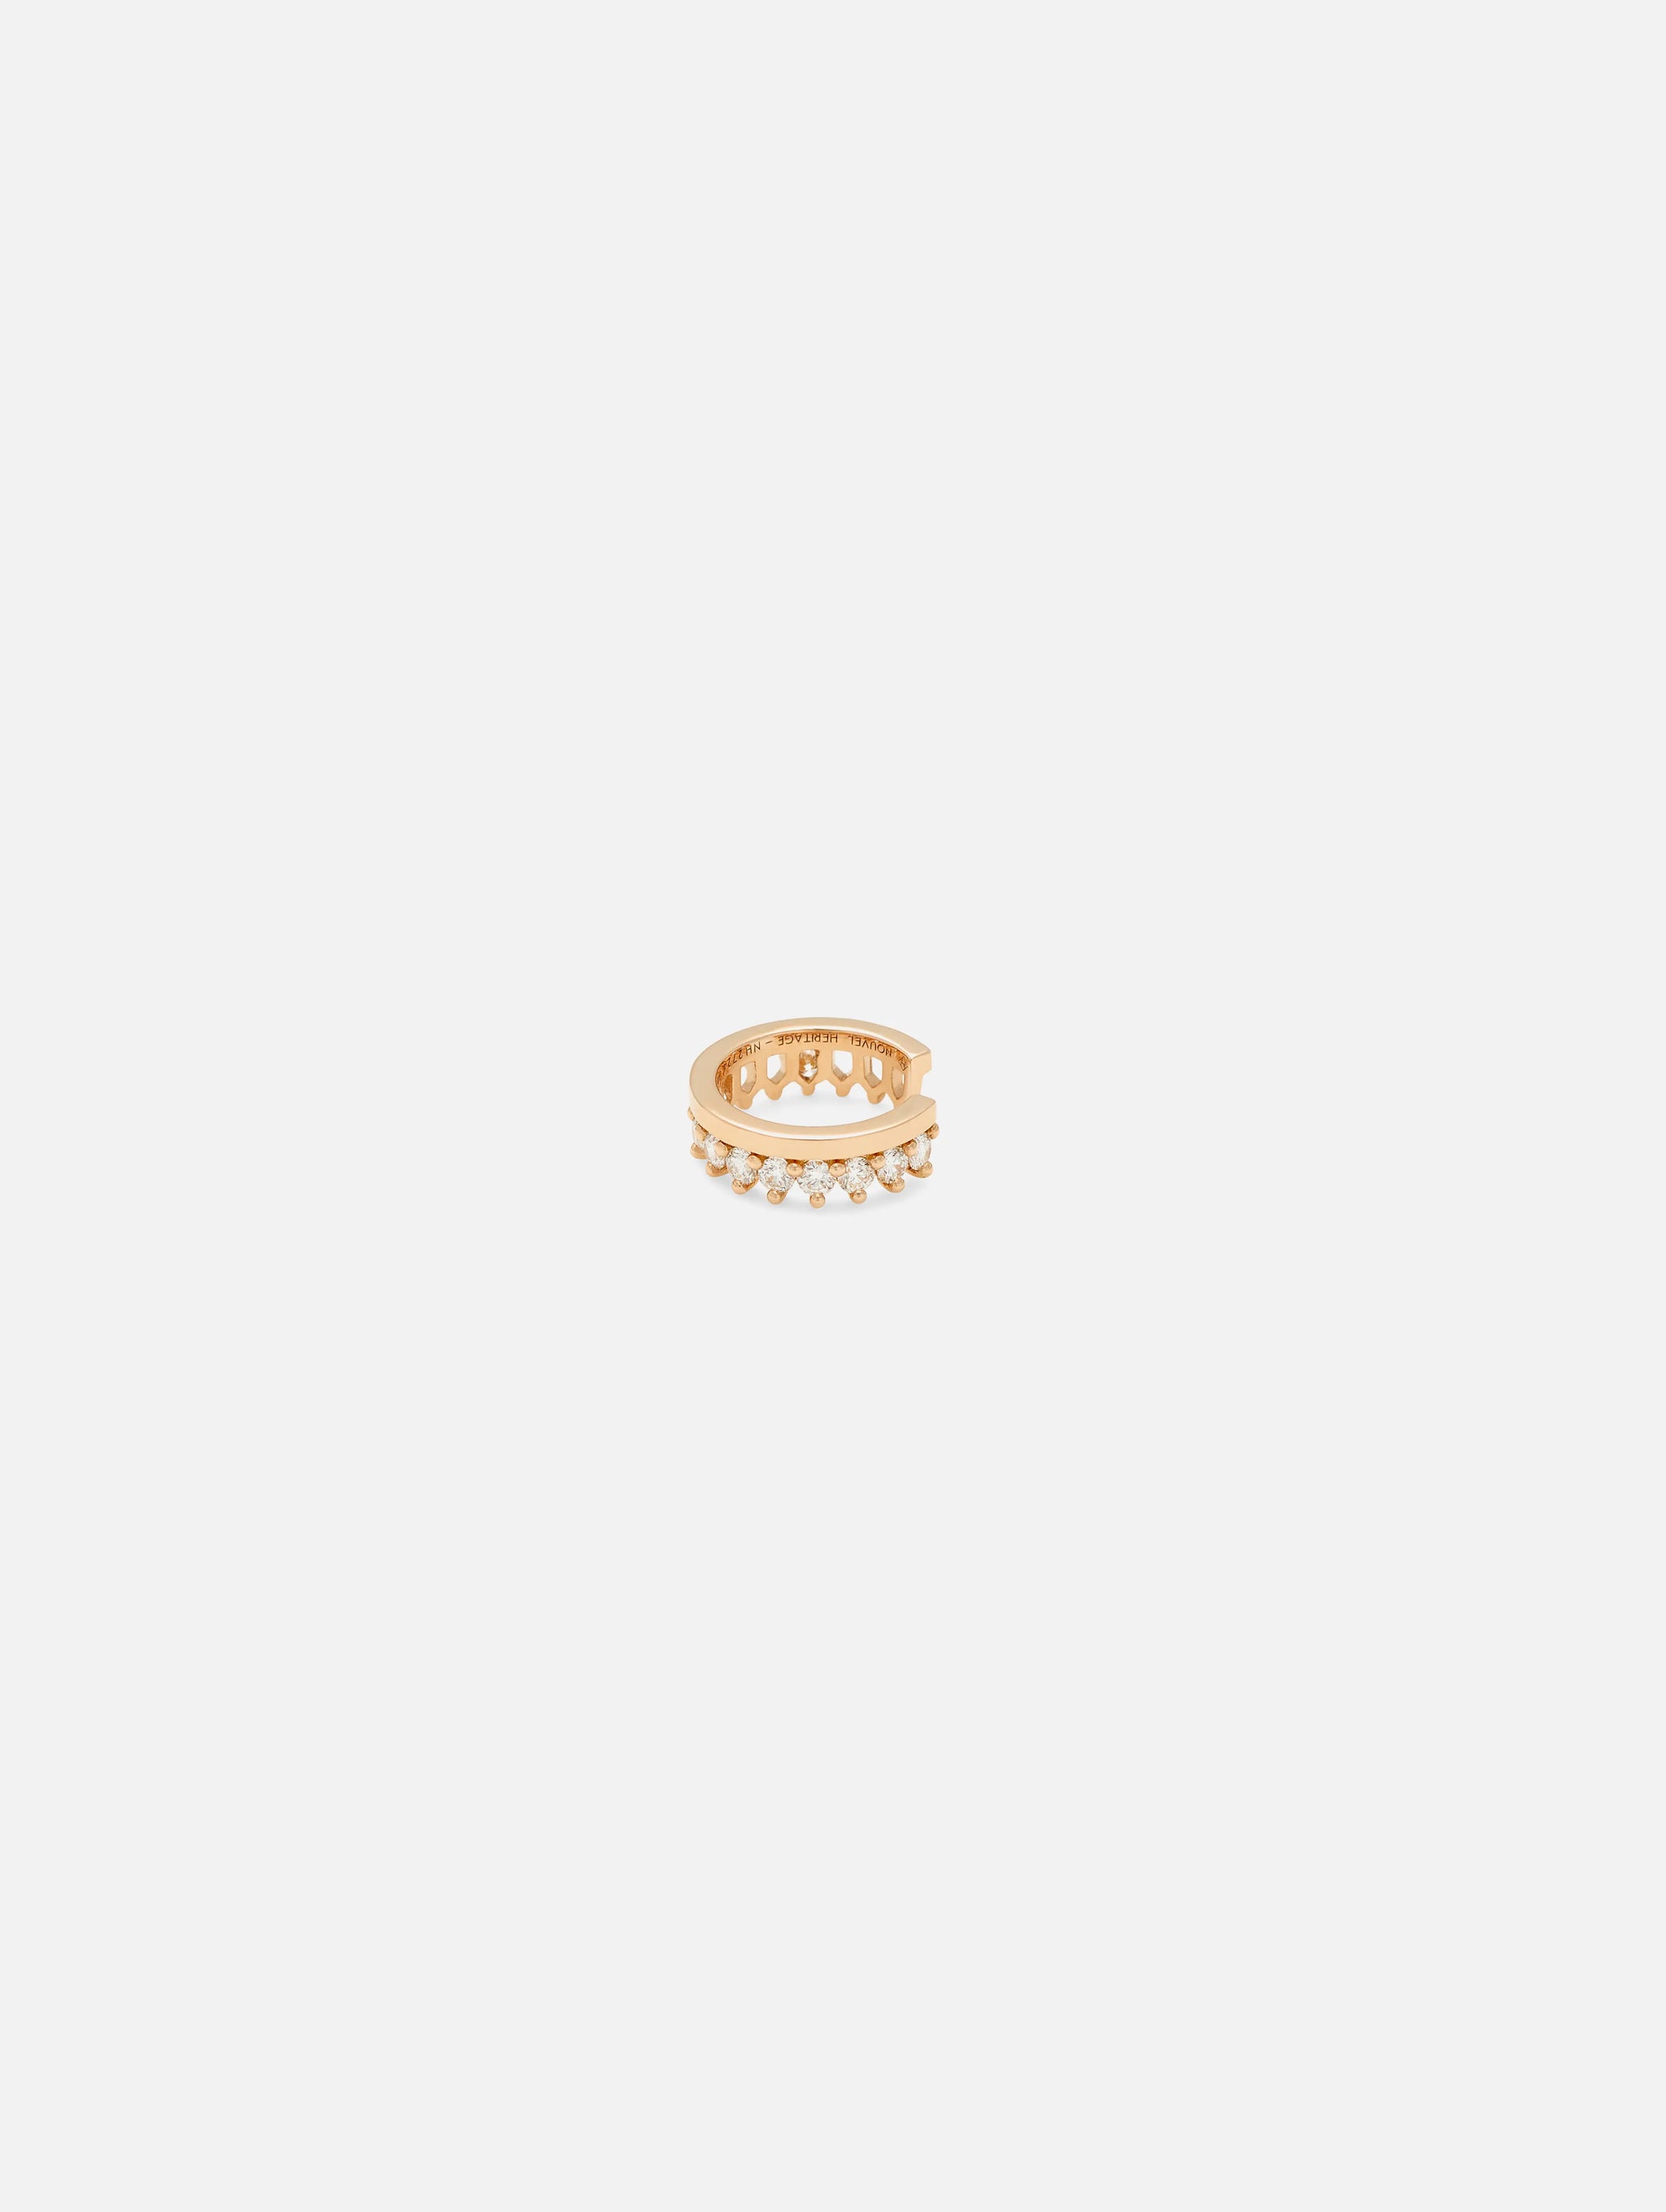 Simple Full Diamond Ear Cuff in Rose Gold - 1 - Nouvel Heritage